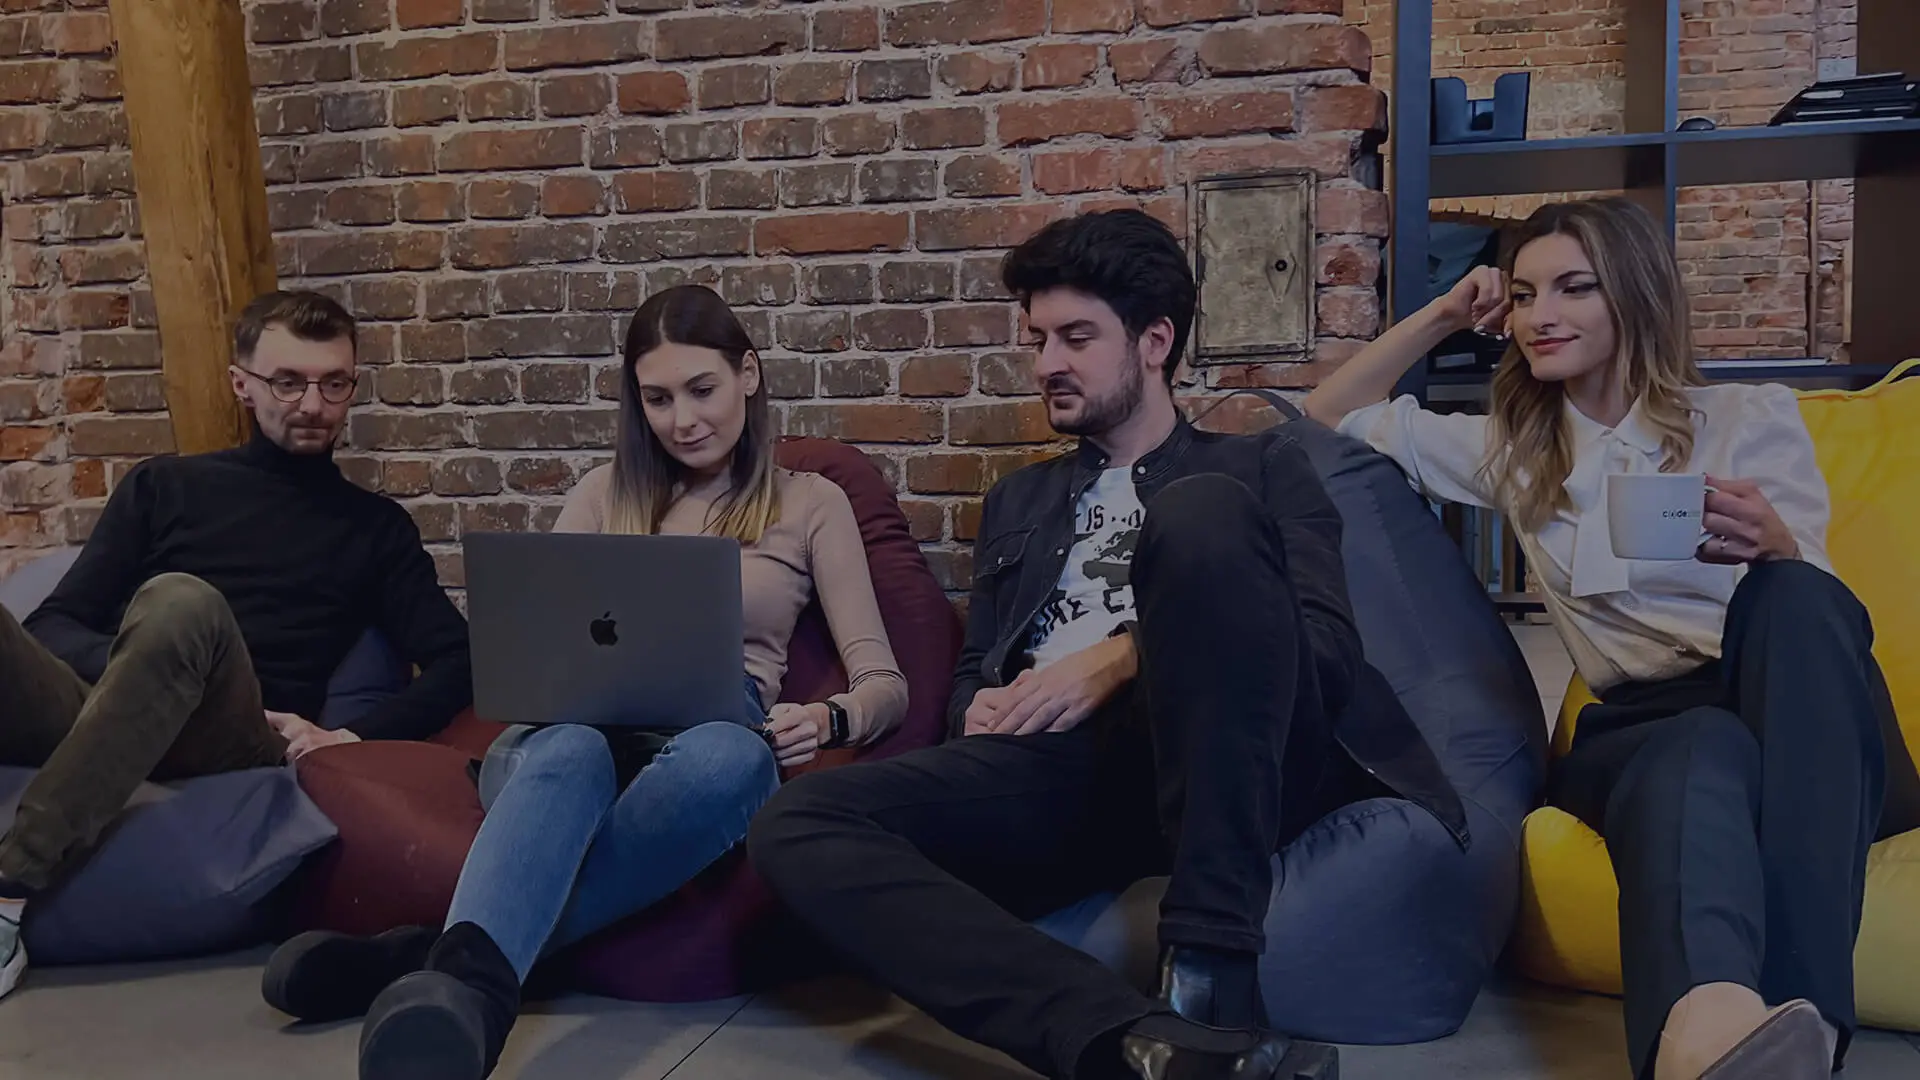 Group of programmers and designers working together on a laptop sitting on beanbags